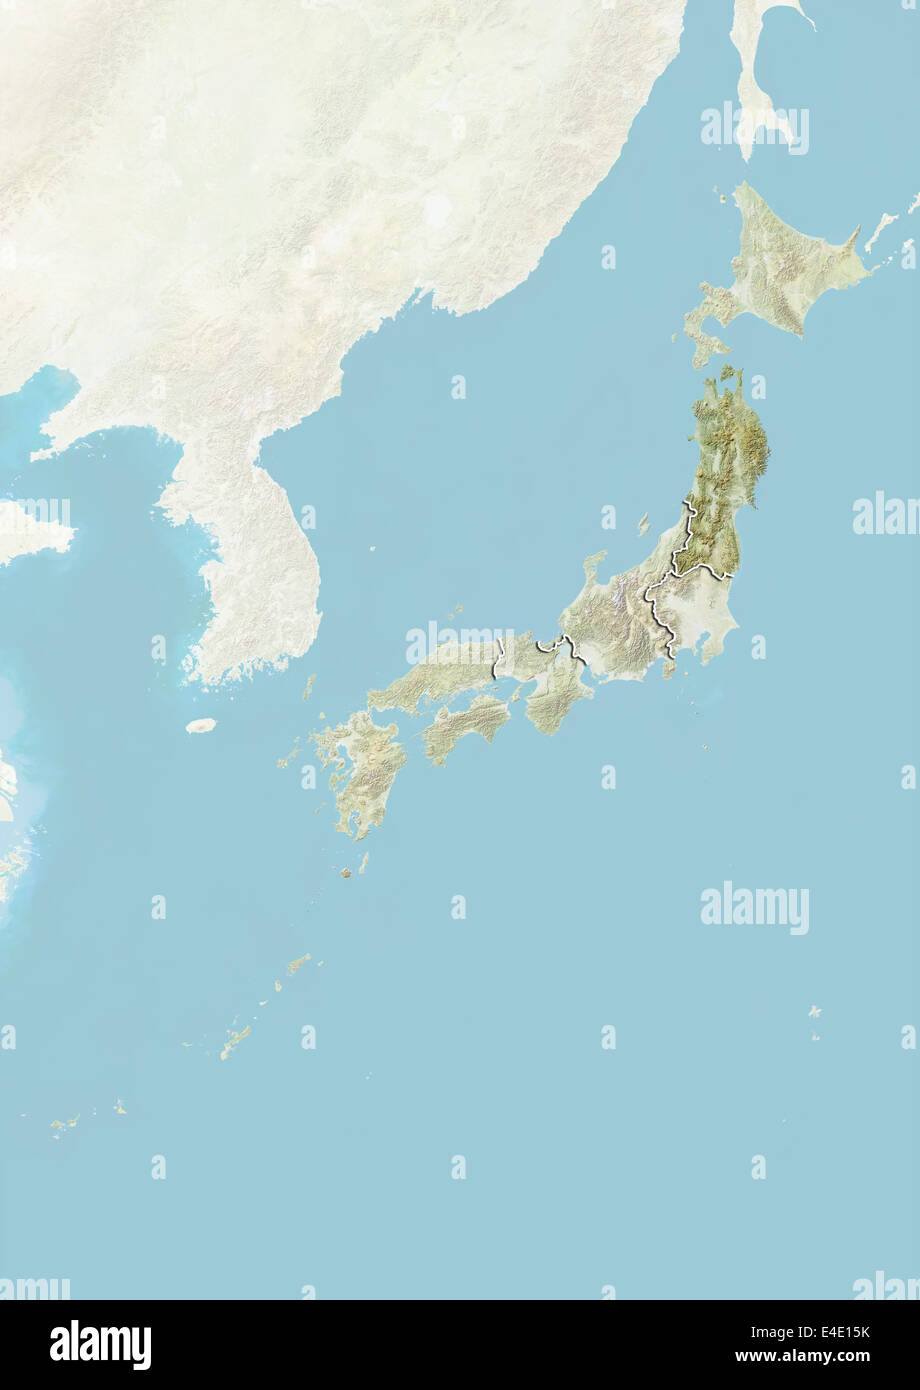 Japan and the Region of Tohoku, Relief Map Stock Photo